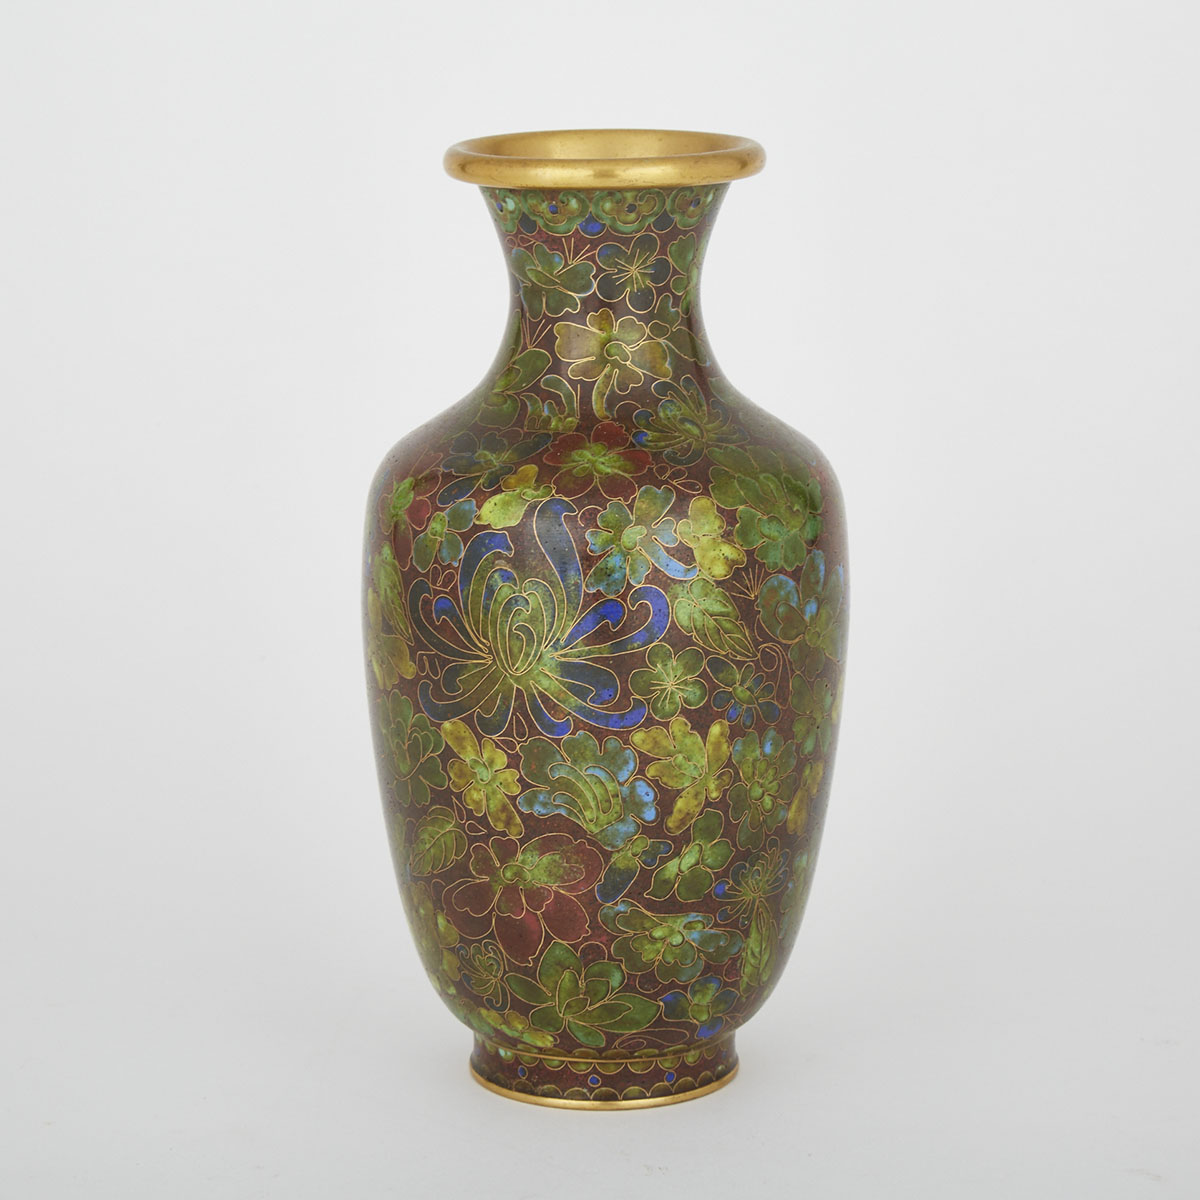 Chinese Cloisonne Vase, Early to Mid 20th Century